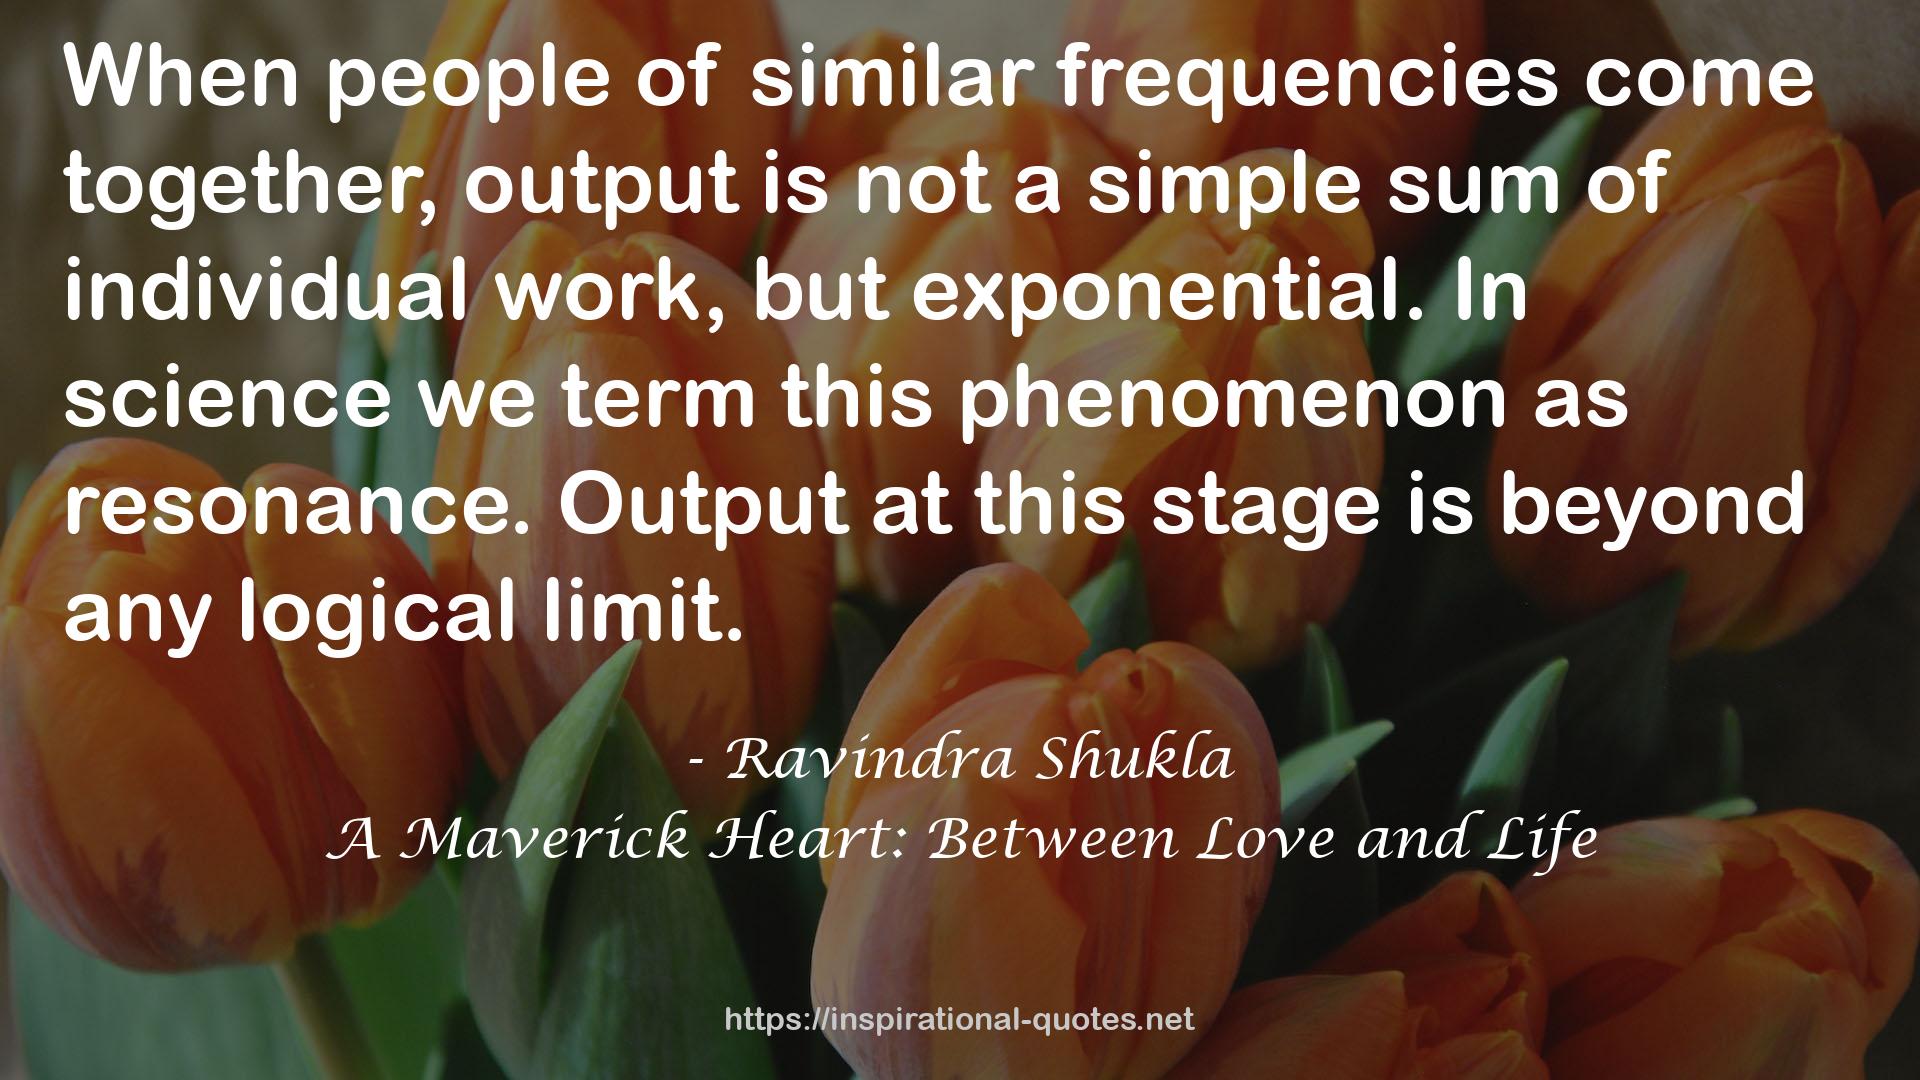 A Maverick Heart: Between Love and Life QUOTES